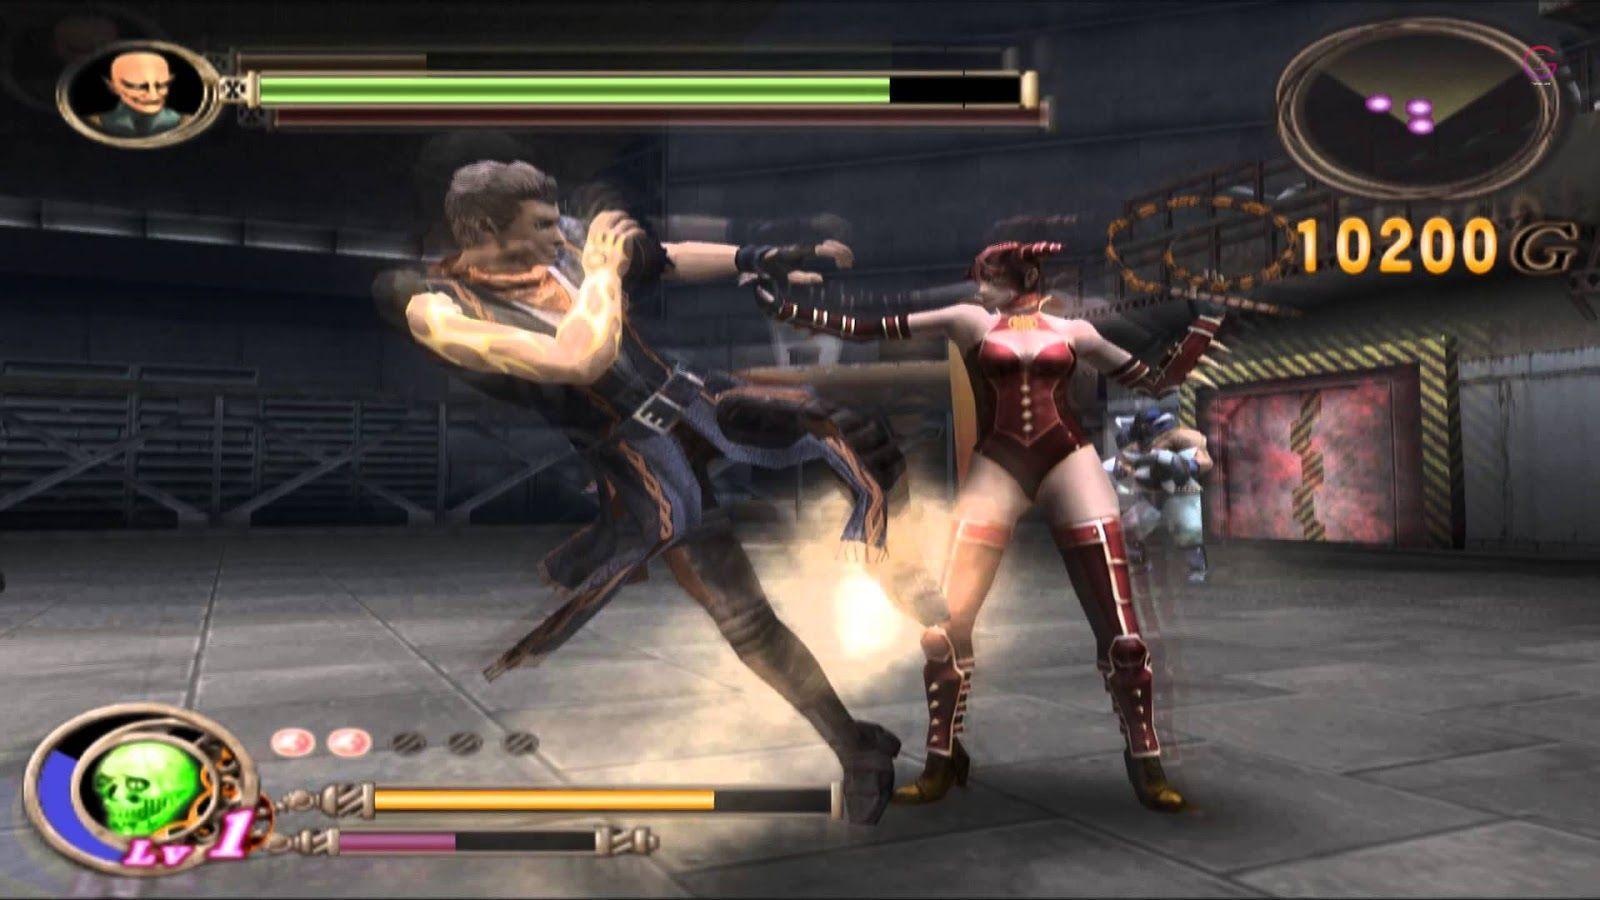 Full Free Game Download: God Hand PC Game Download Full Version